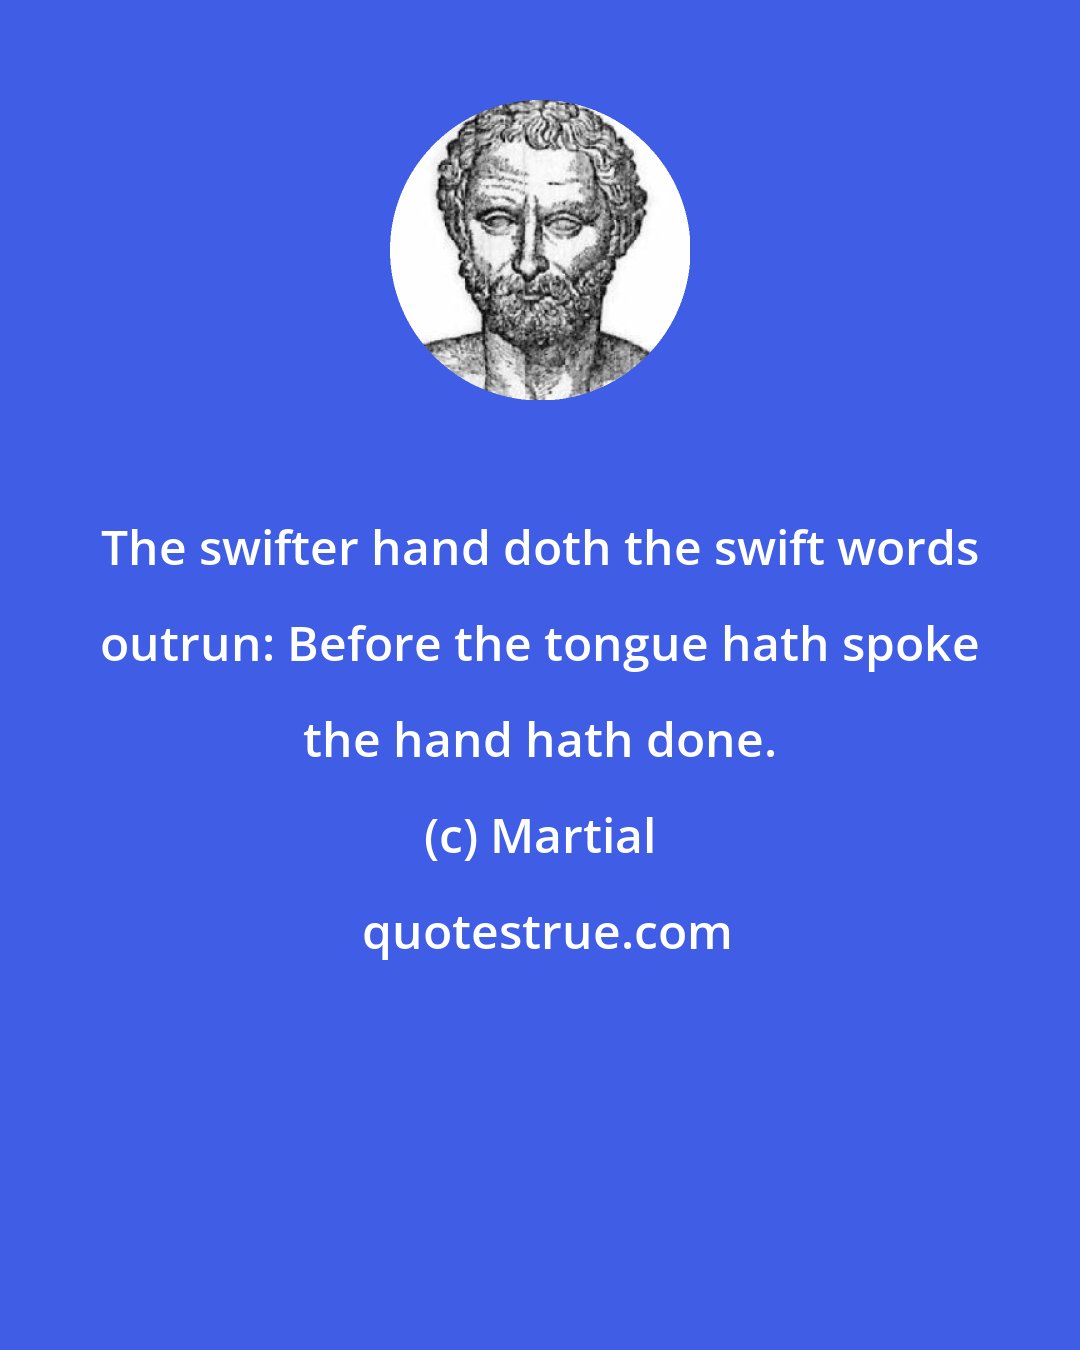 Martial: The swifter hand doth the swift words outrun: Before the tongue hath spoke the hand hath done.